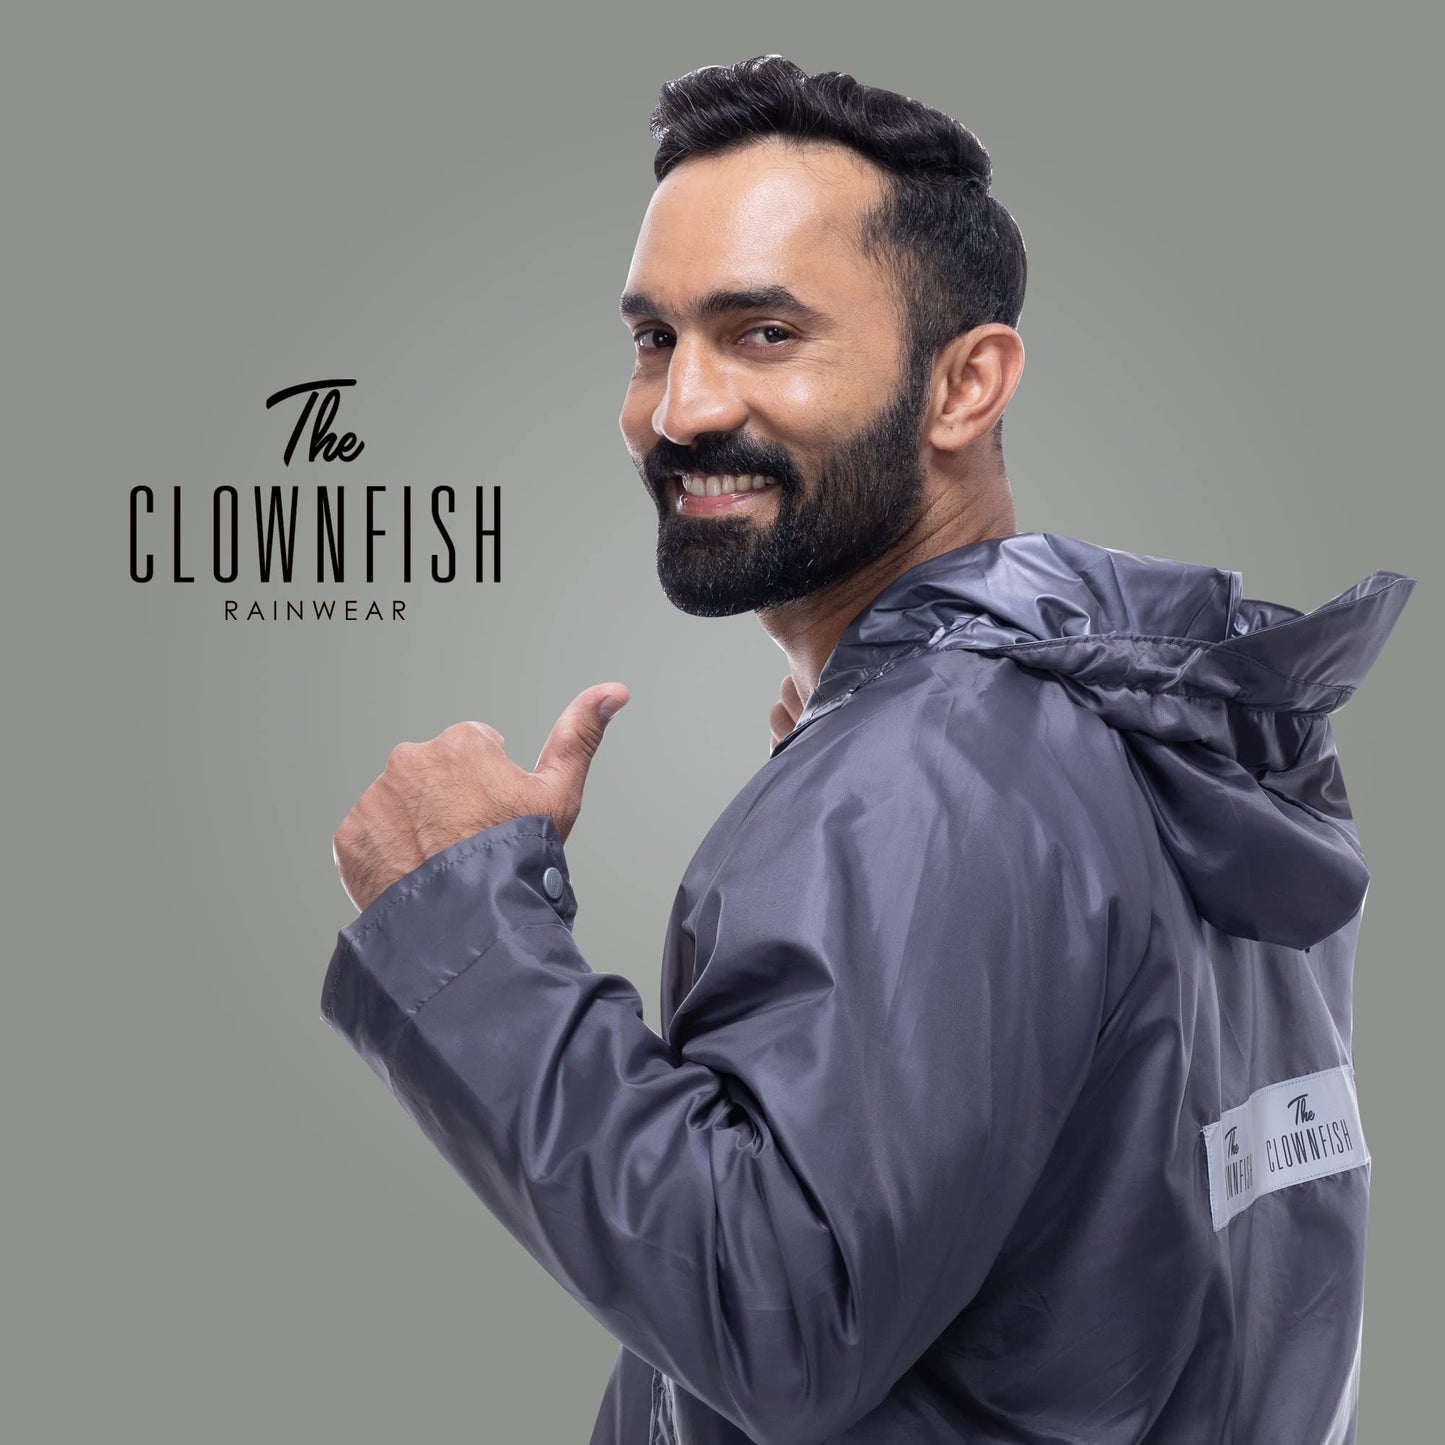 THE CLOWNFISH Rain Coat for Men Waterproof for Bike Reversible Double Layer with Hood Raincoat for Men. Set of Top and Bottom Packed in a Storage Bag Captain Pro Series (Olive Green, XX-Large)